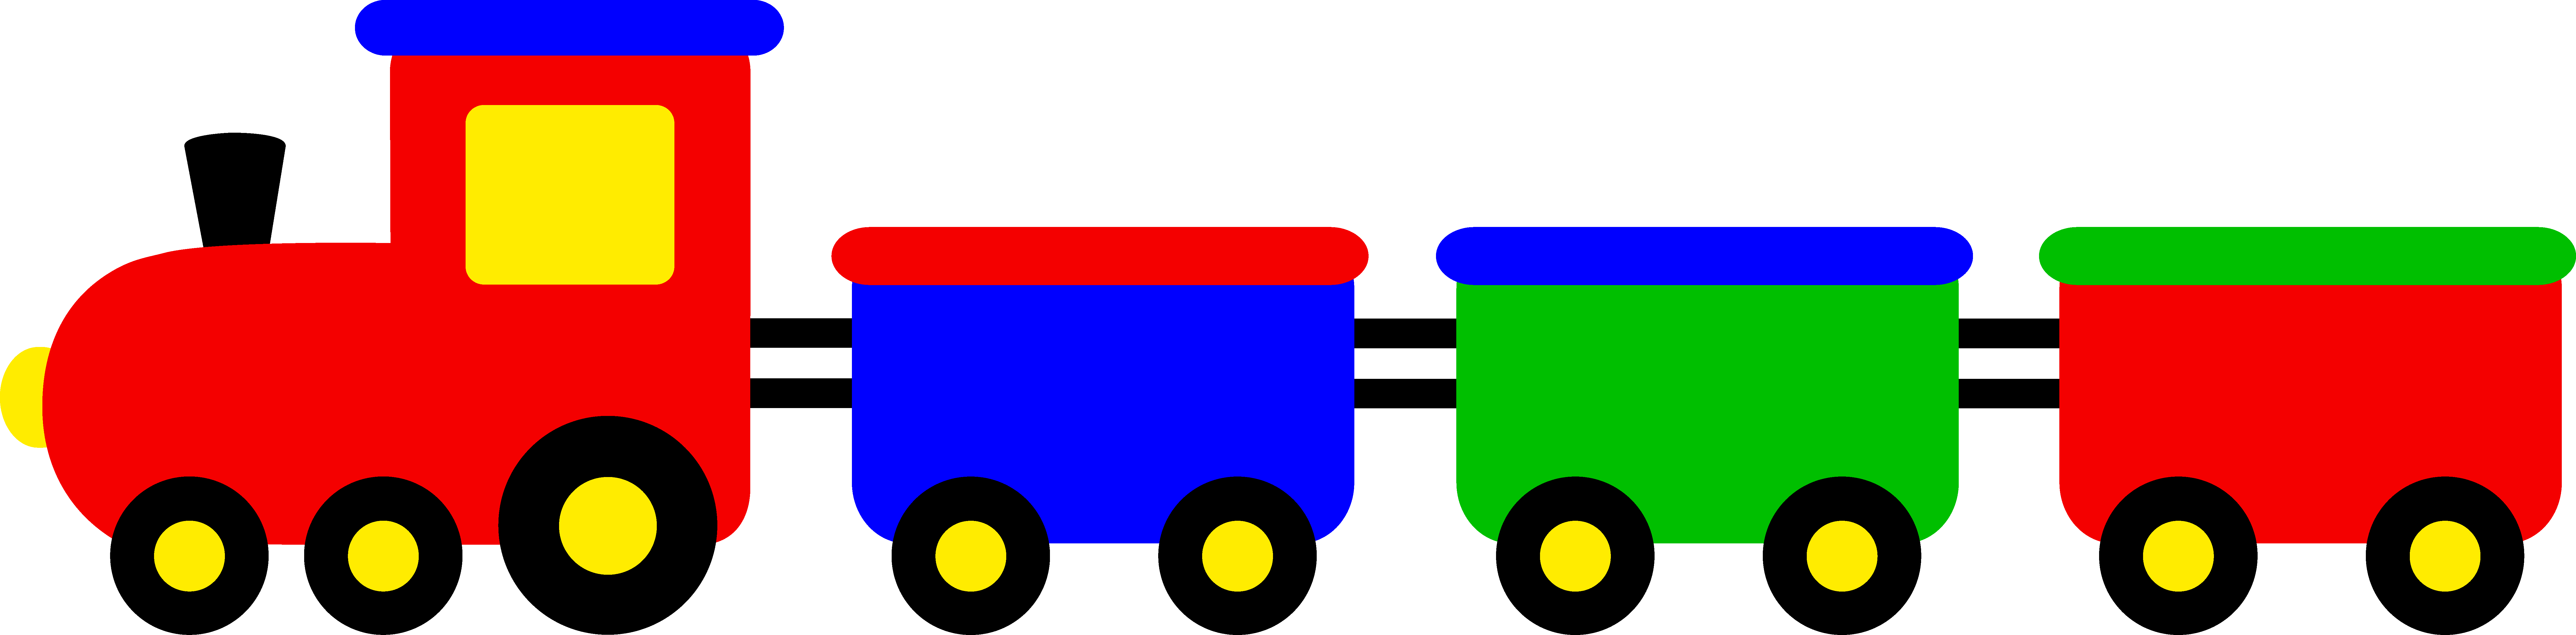 Toy Train Picture - ClipArt Best